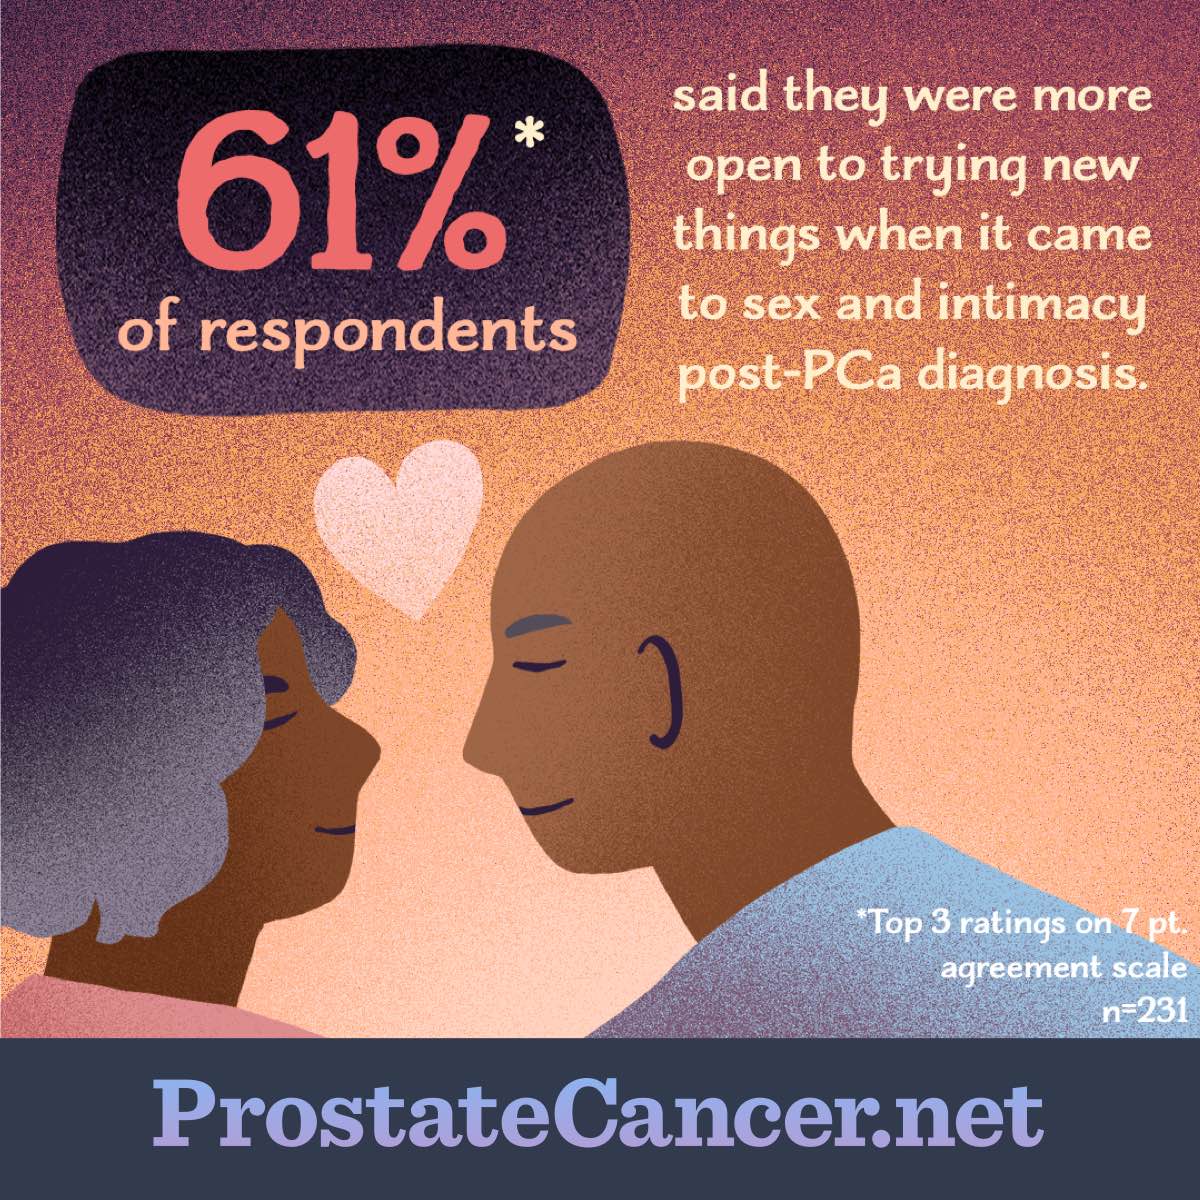 61% of respondents said they were more open to trying new things when it came to sex and intimacy post-PCa diagnosis.